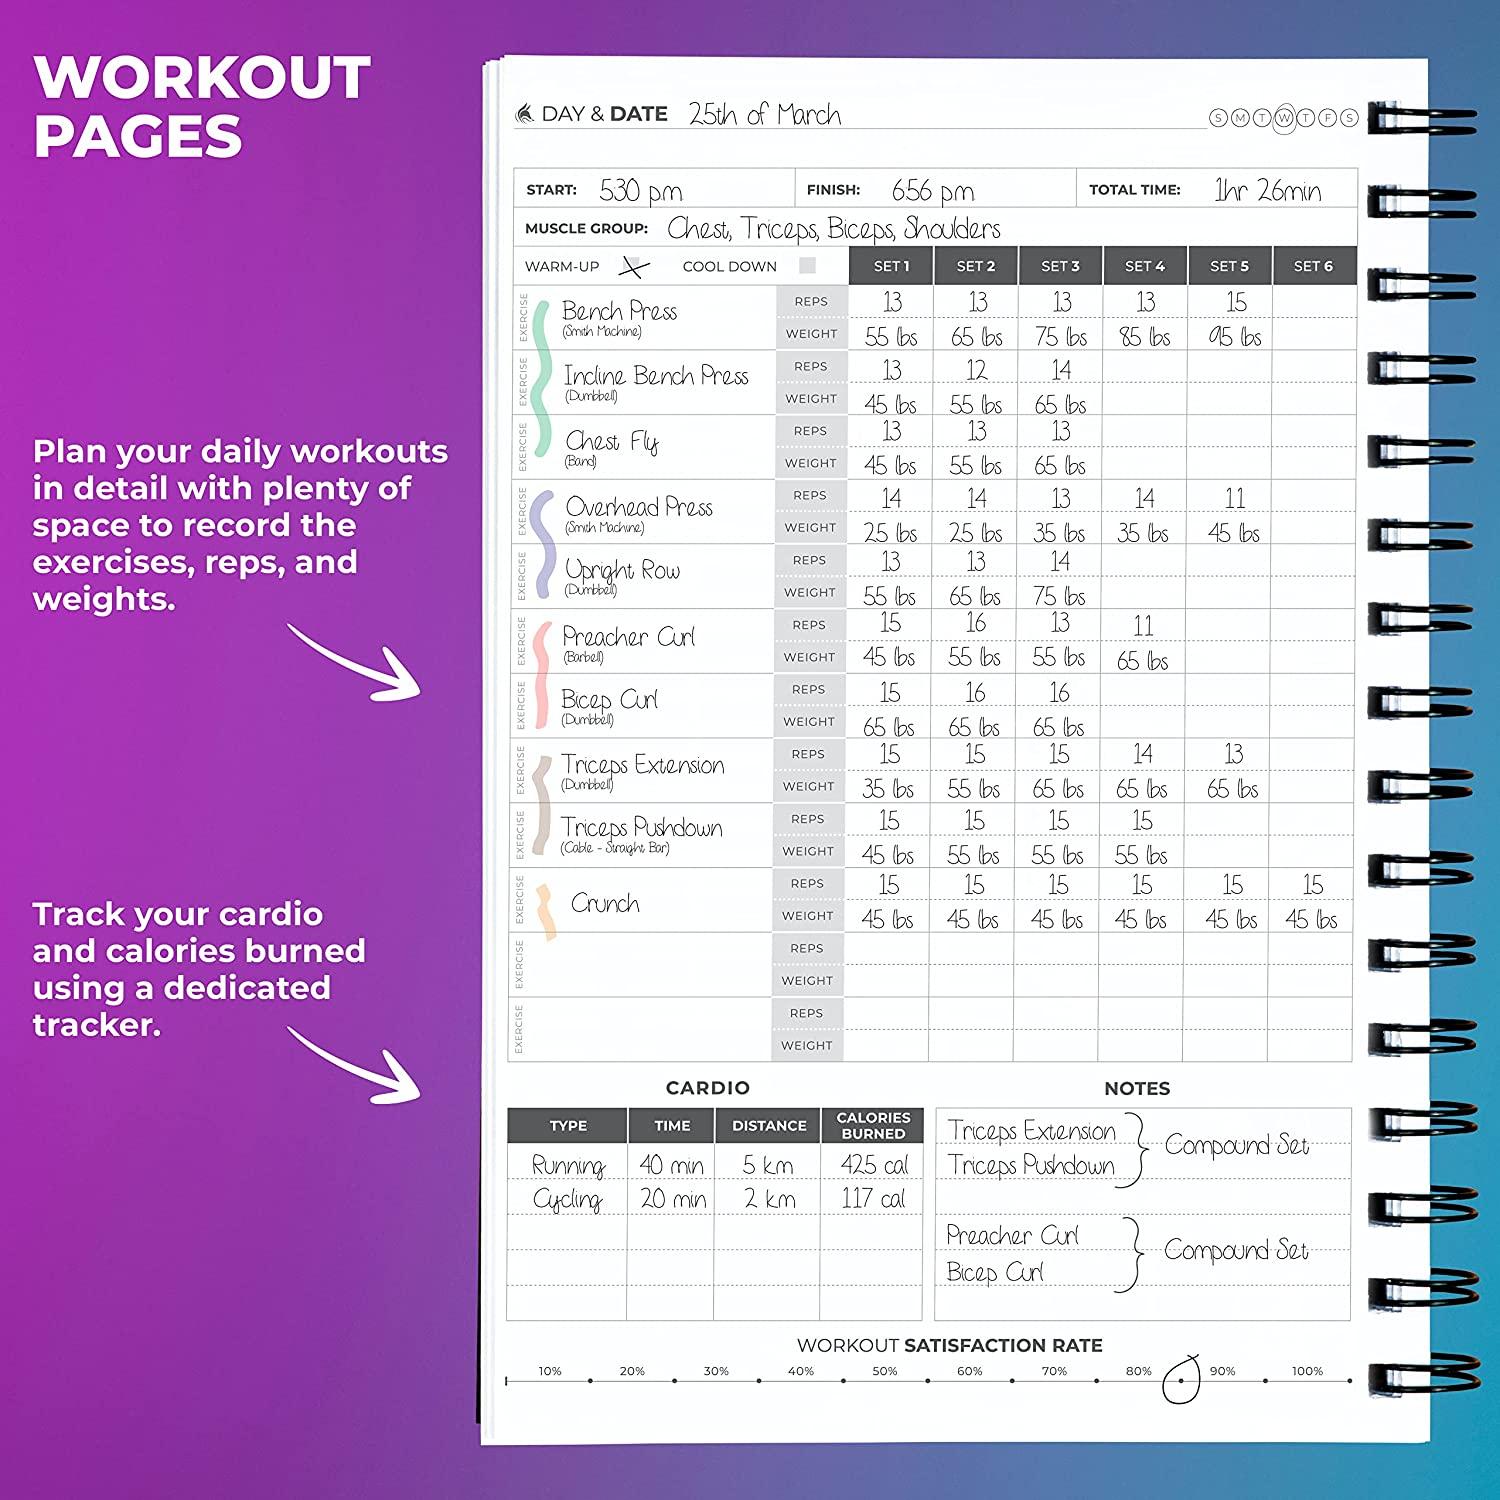 Clever Fox Fitness Journal Workout Log Book - Daily Fitness Planner Workout  Journal for Women and Men. Spiral-Bound, Laminated Cover, Thick Pages, A5  (Pink & Dark Purple)